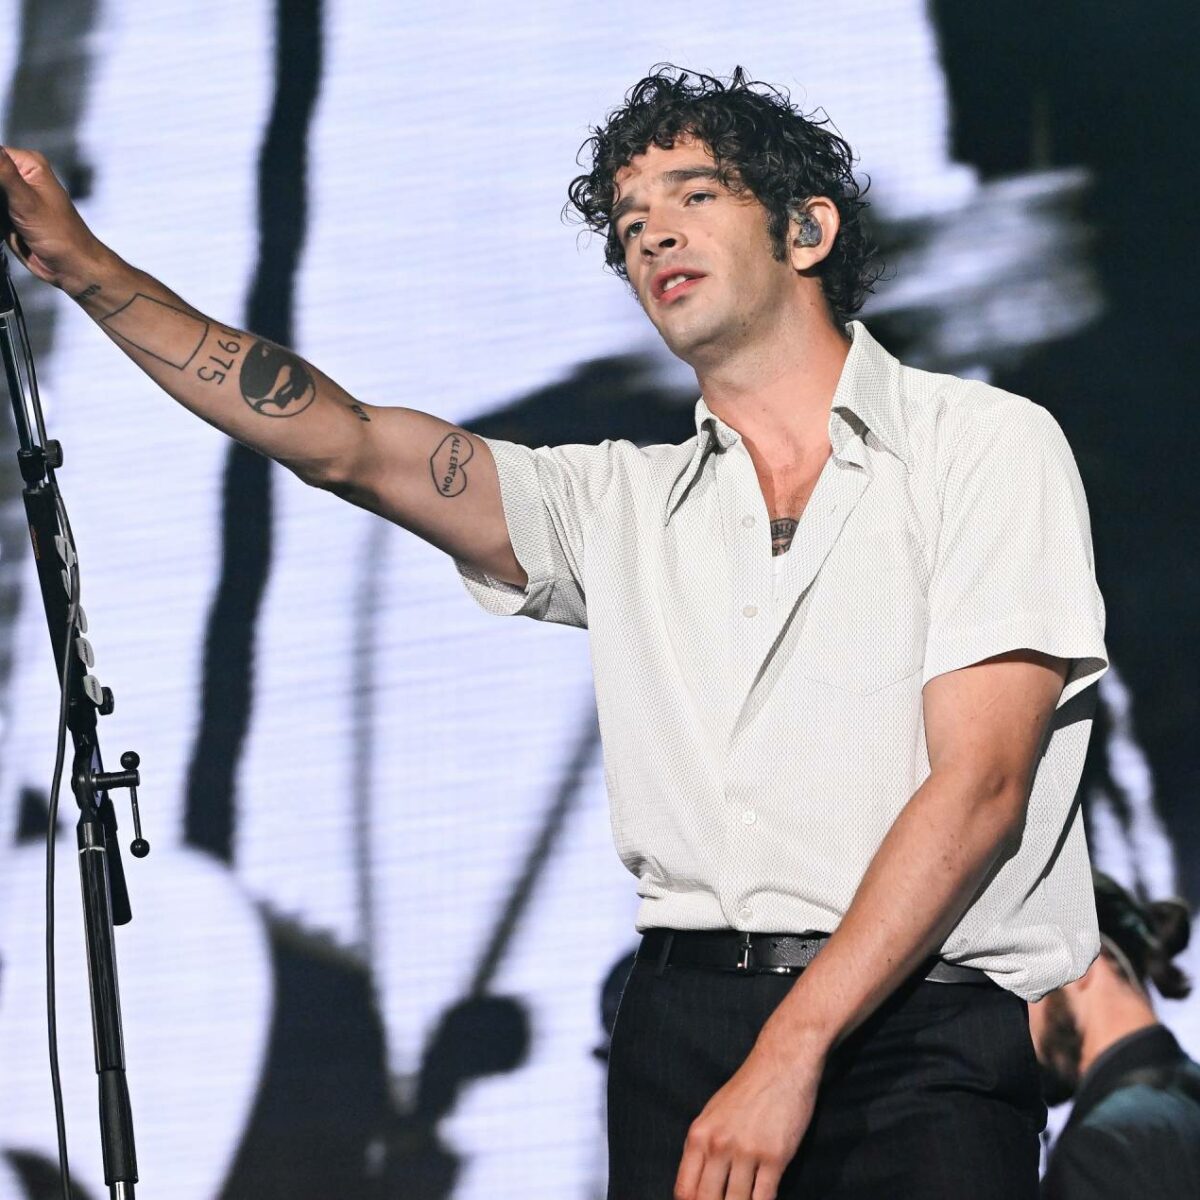 The 1975’s Controversial Act in Malaysia and Its Financial Repercussions